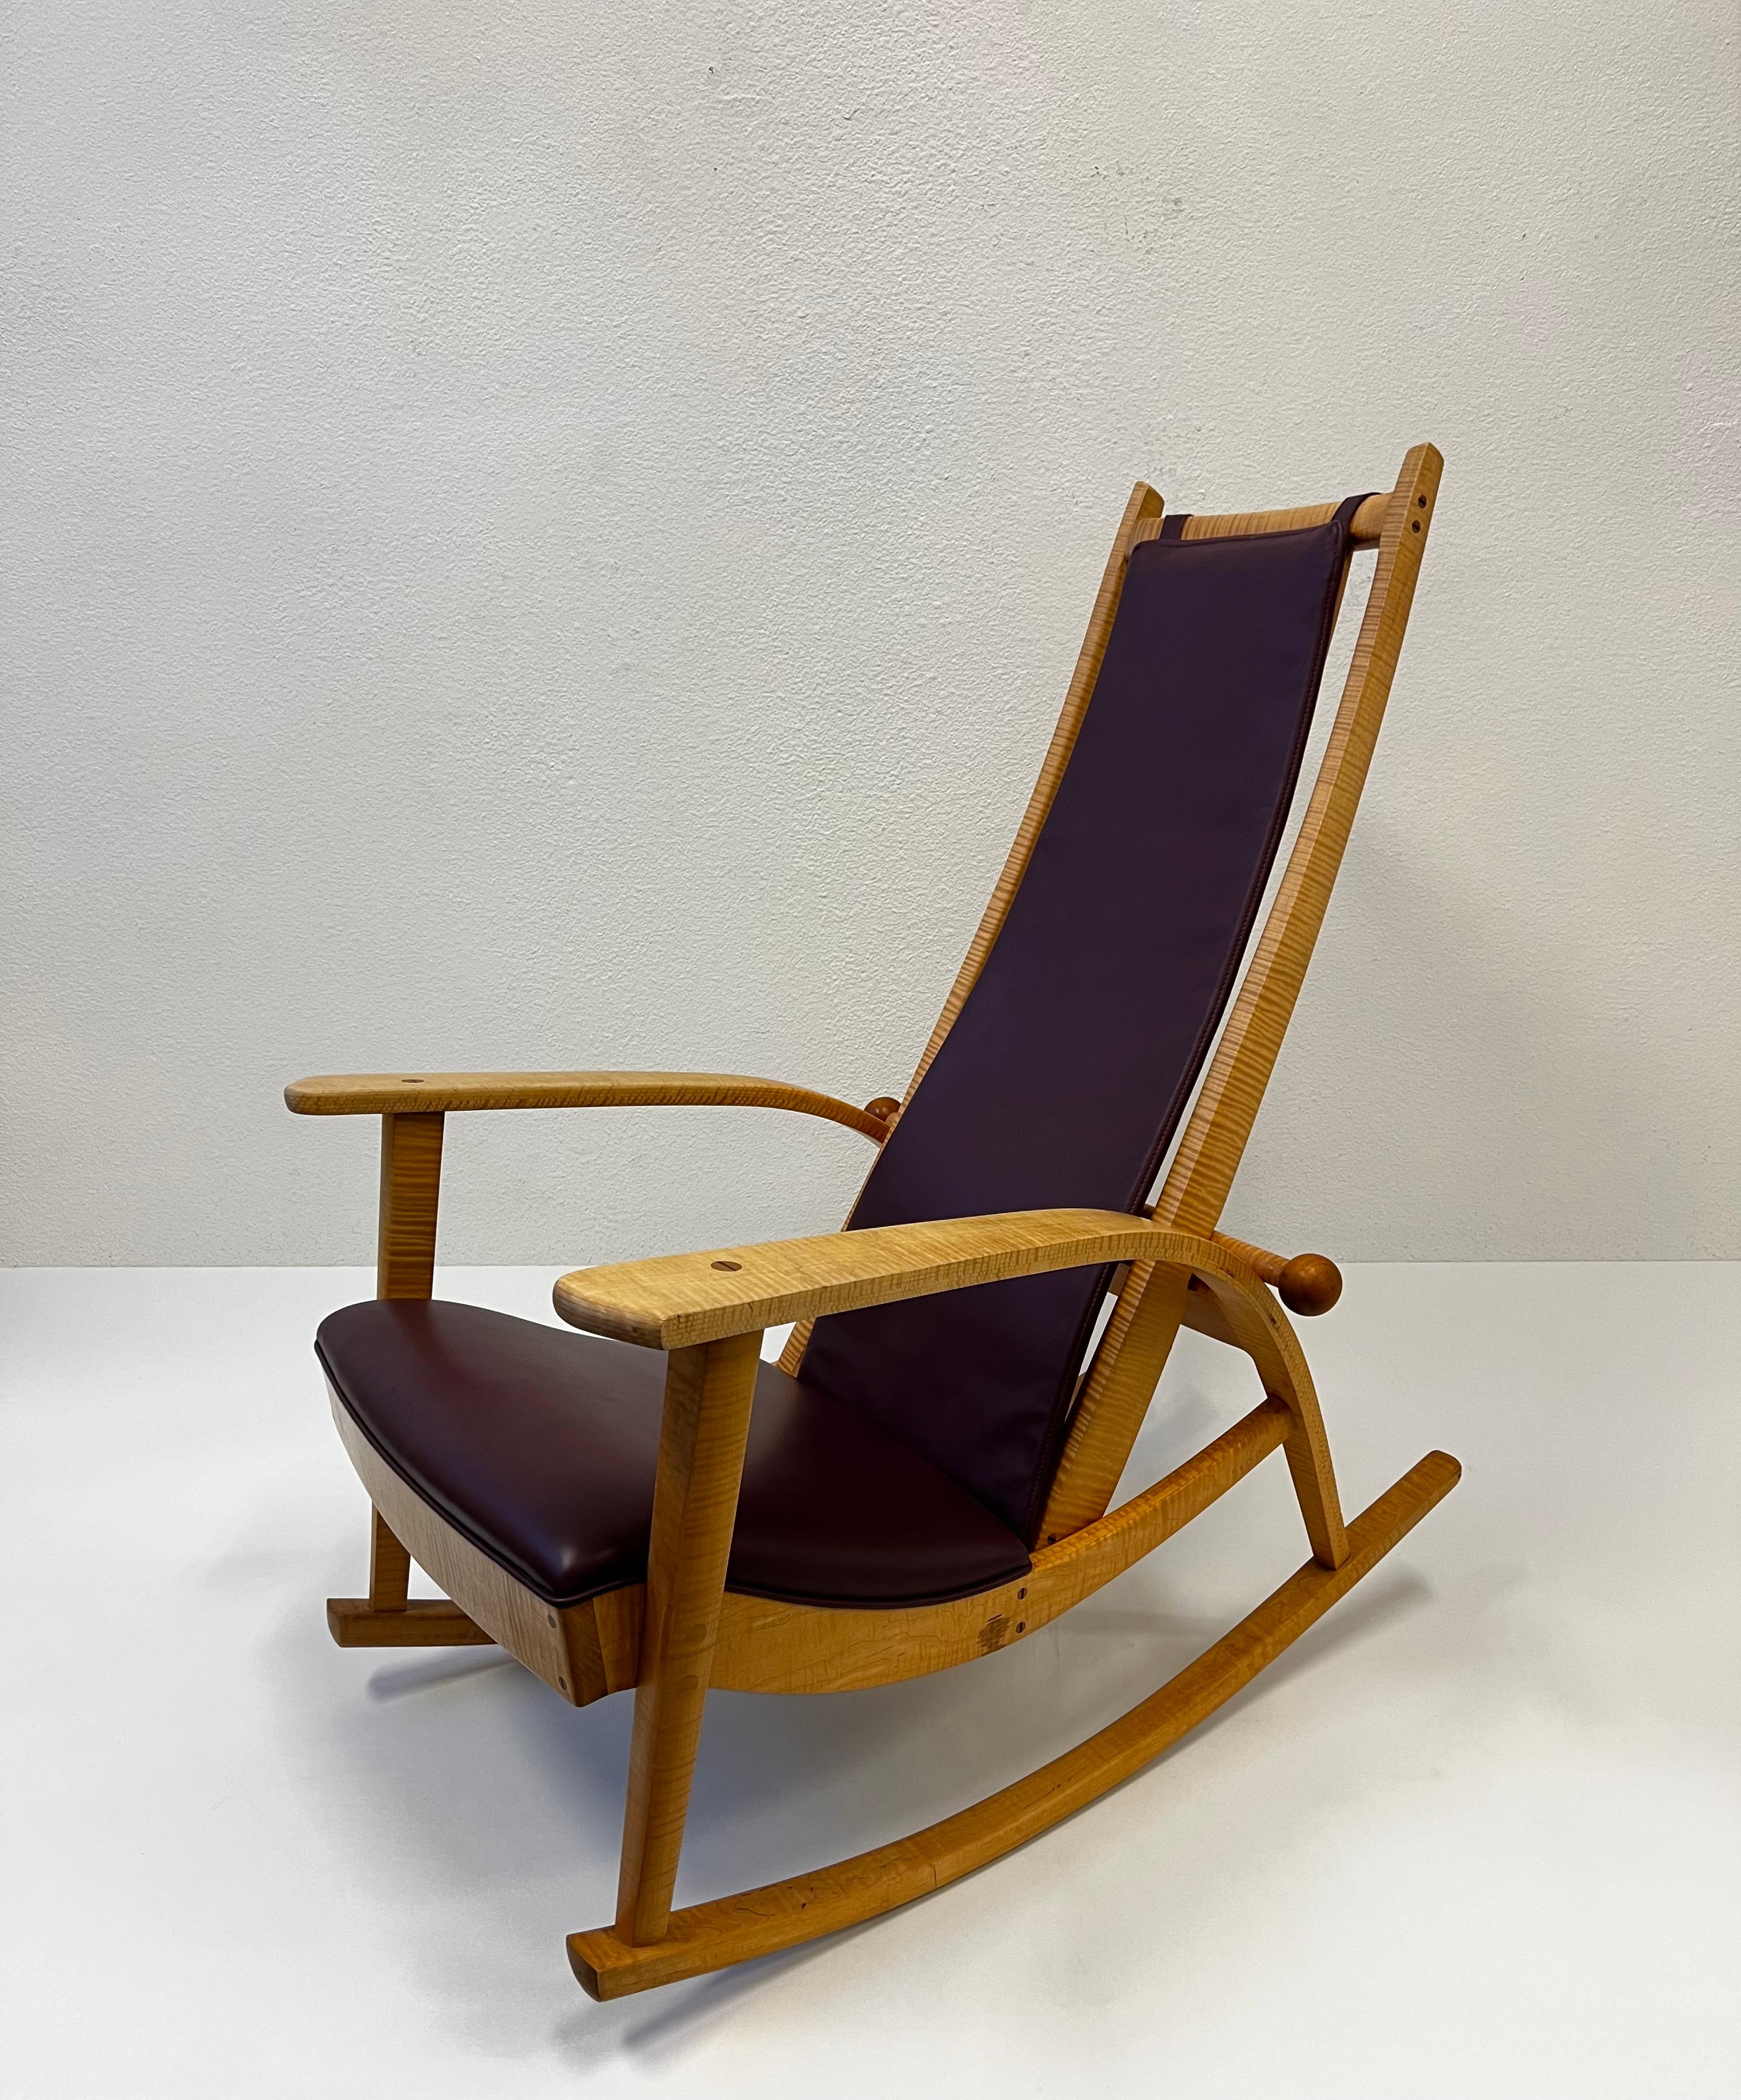 Studio hand crafted tiger maple and leather rocking chair by Robert Erickson. 
In original condition shows minor wear consistent with age. 
Signed and numbered(see detail photo). 

Measurements: 39” Deep, 28.75” Wide, 43.75” High, 16” Seat, 23” Arm. 